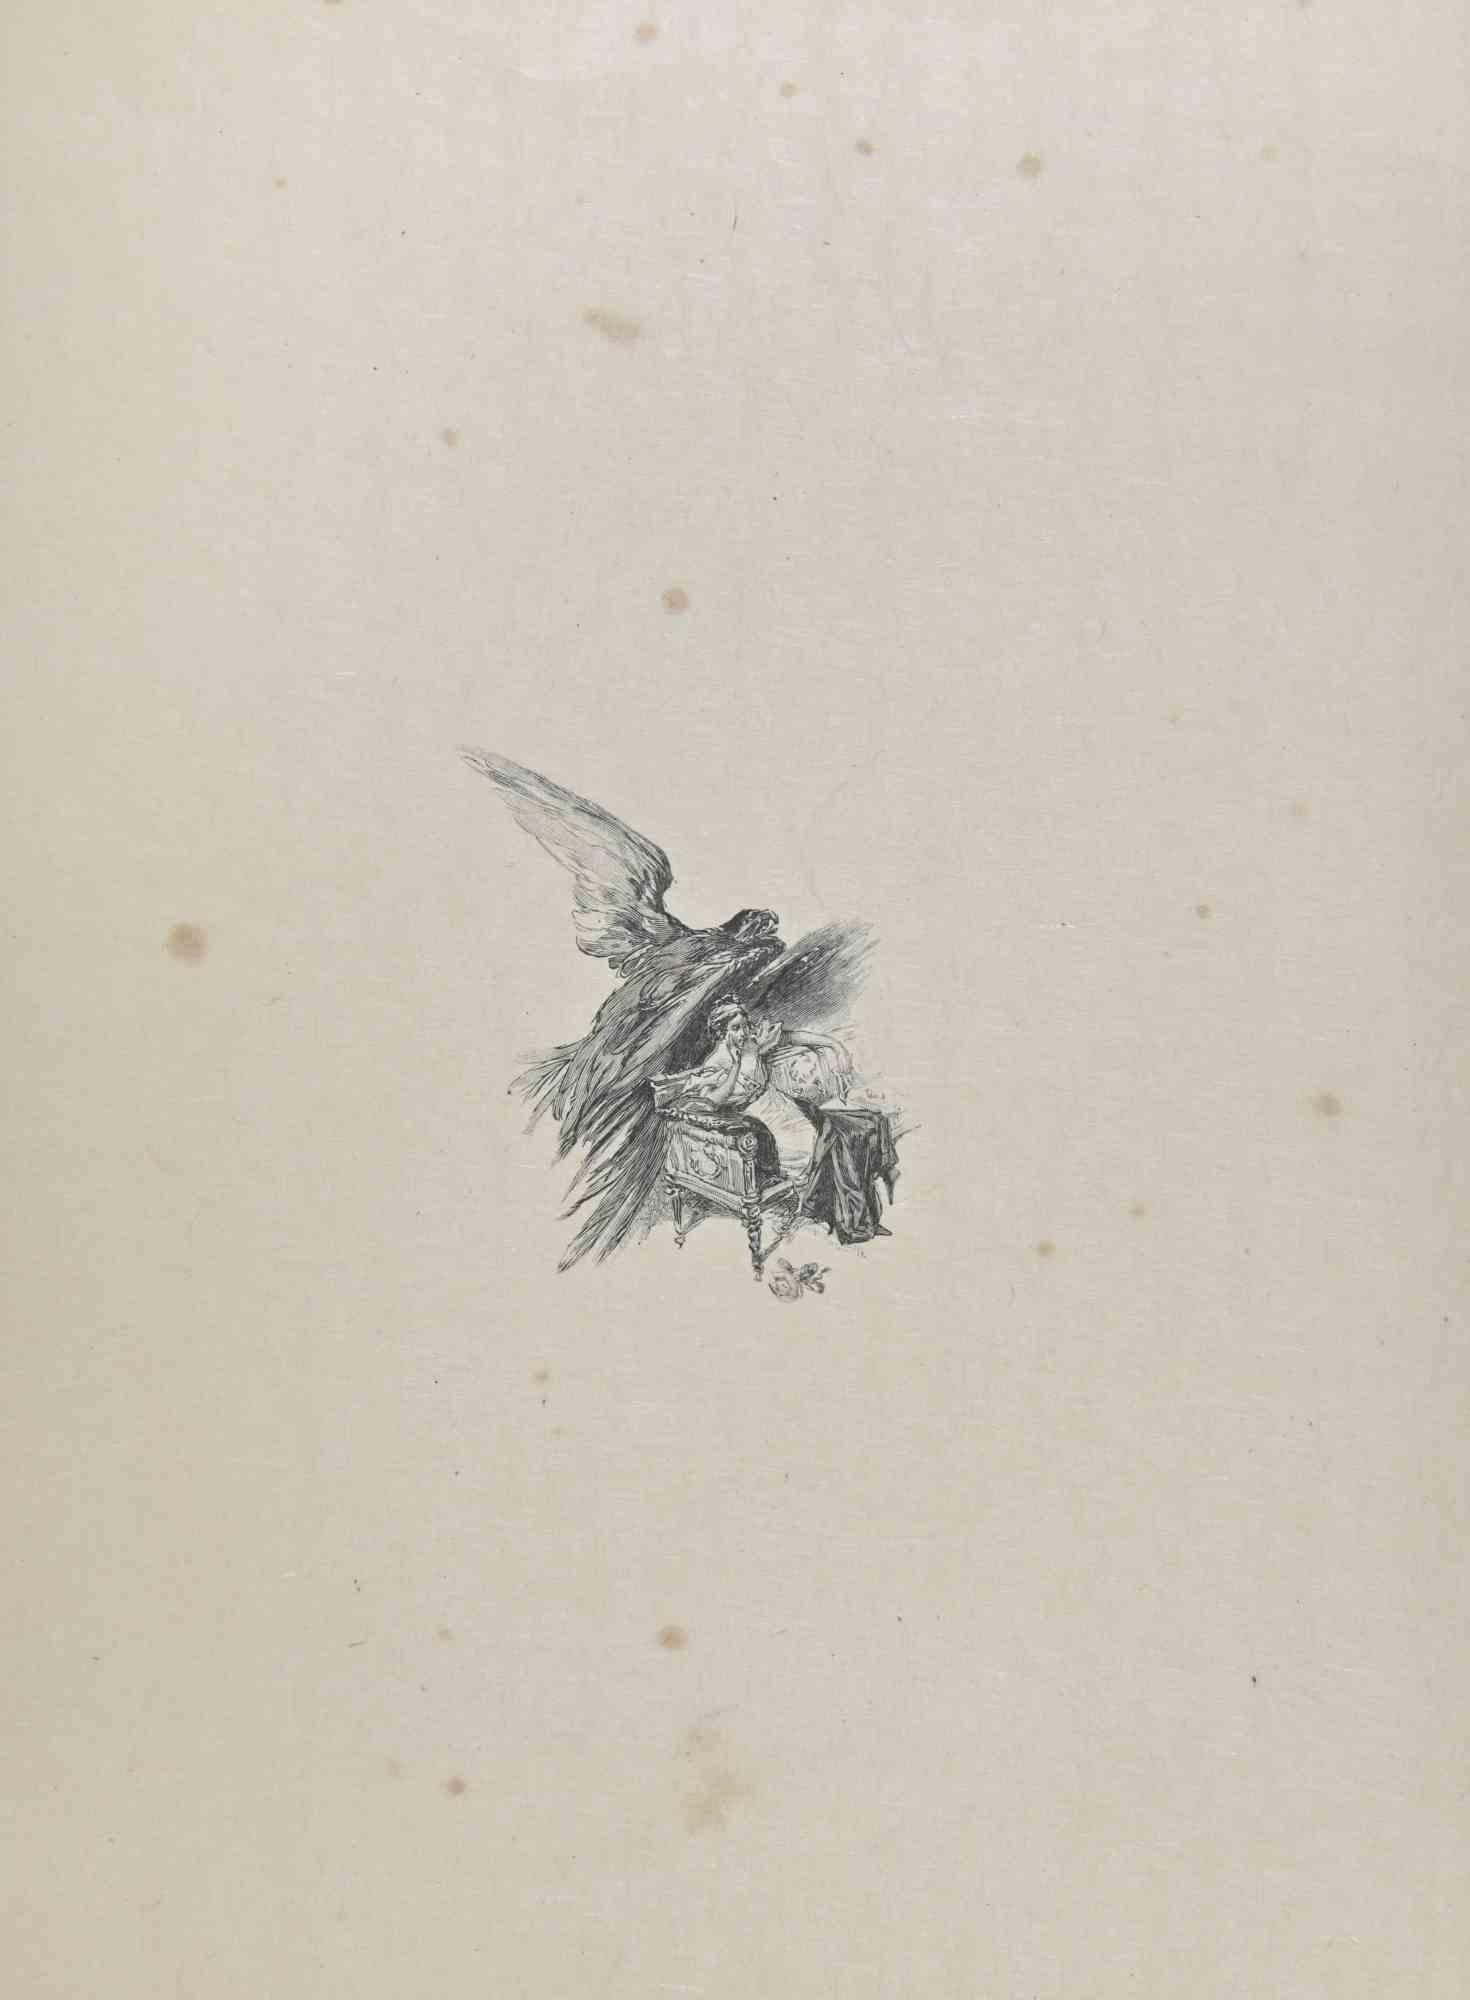 The Flight is a Lithograph on paper realized by Hégésippe Moreau in 1838.

The artwork is in good condition.

Hégésippe Moreau (1810-1838) was a French lyric poet. The romantic myth was solidified by the publication of his complete works;Moreau's